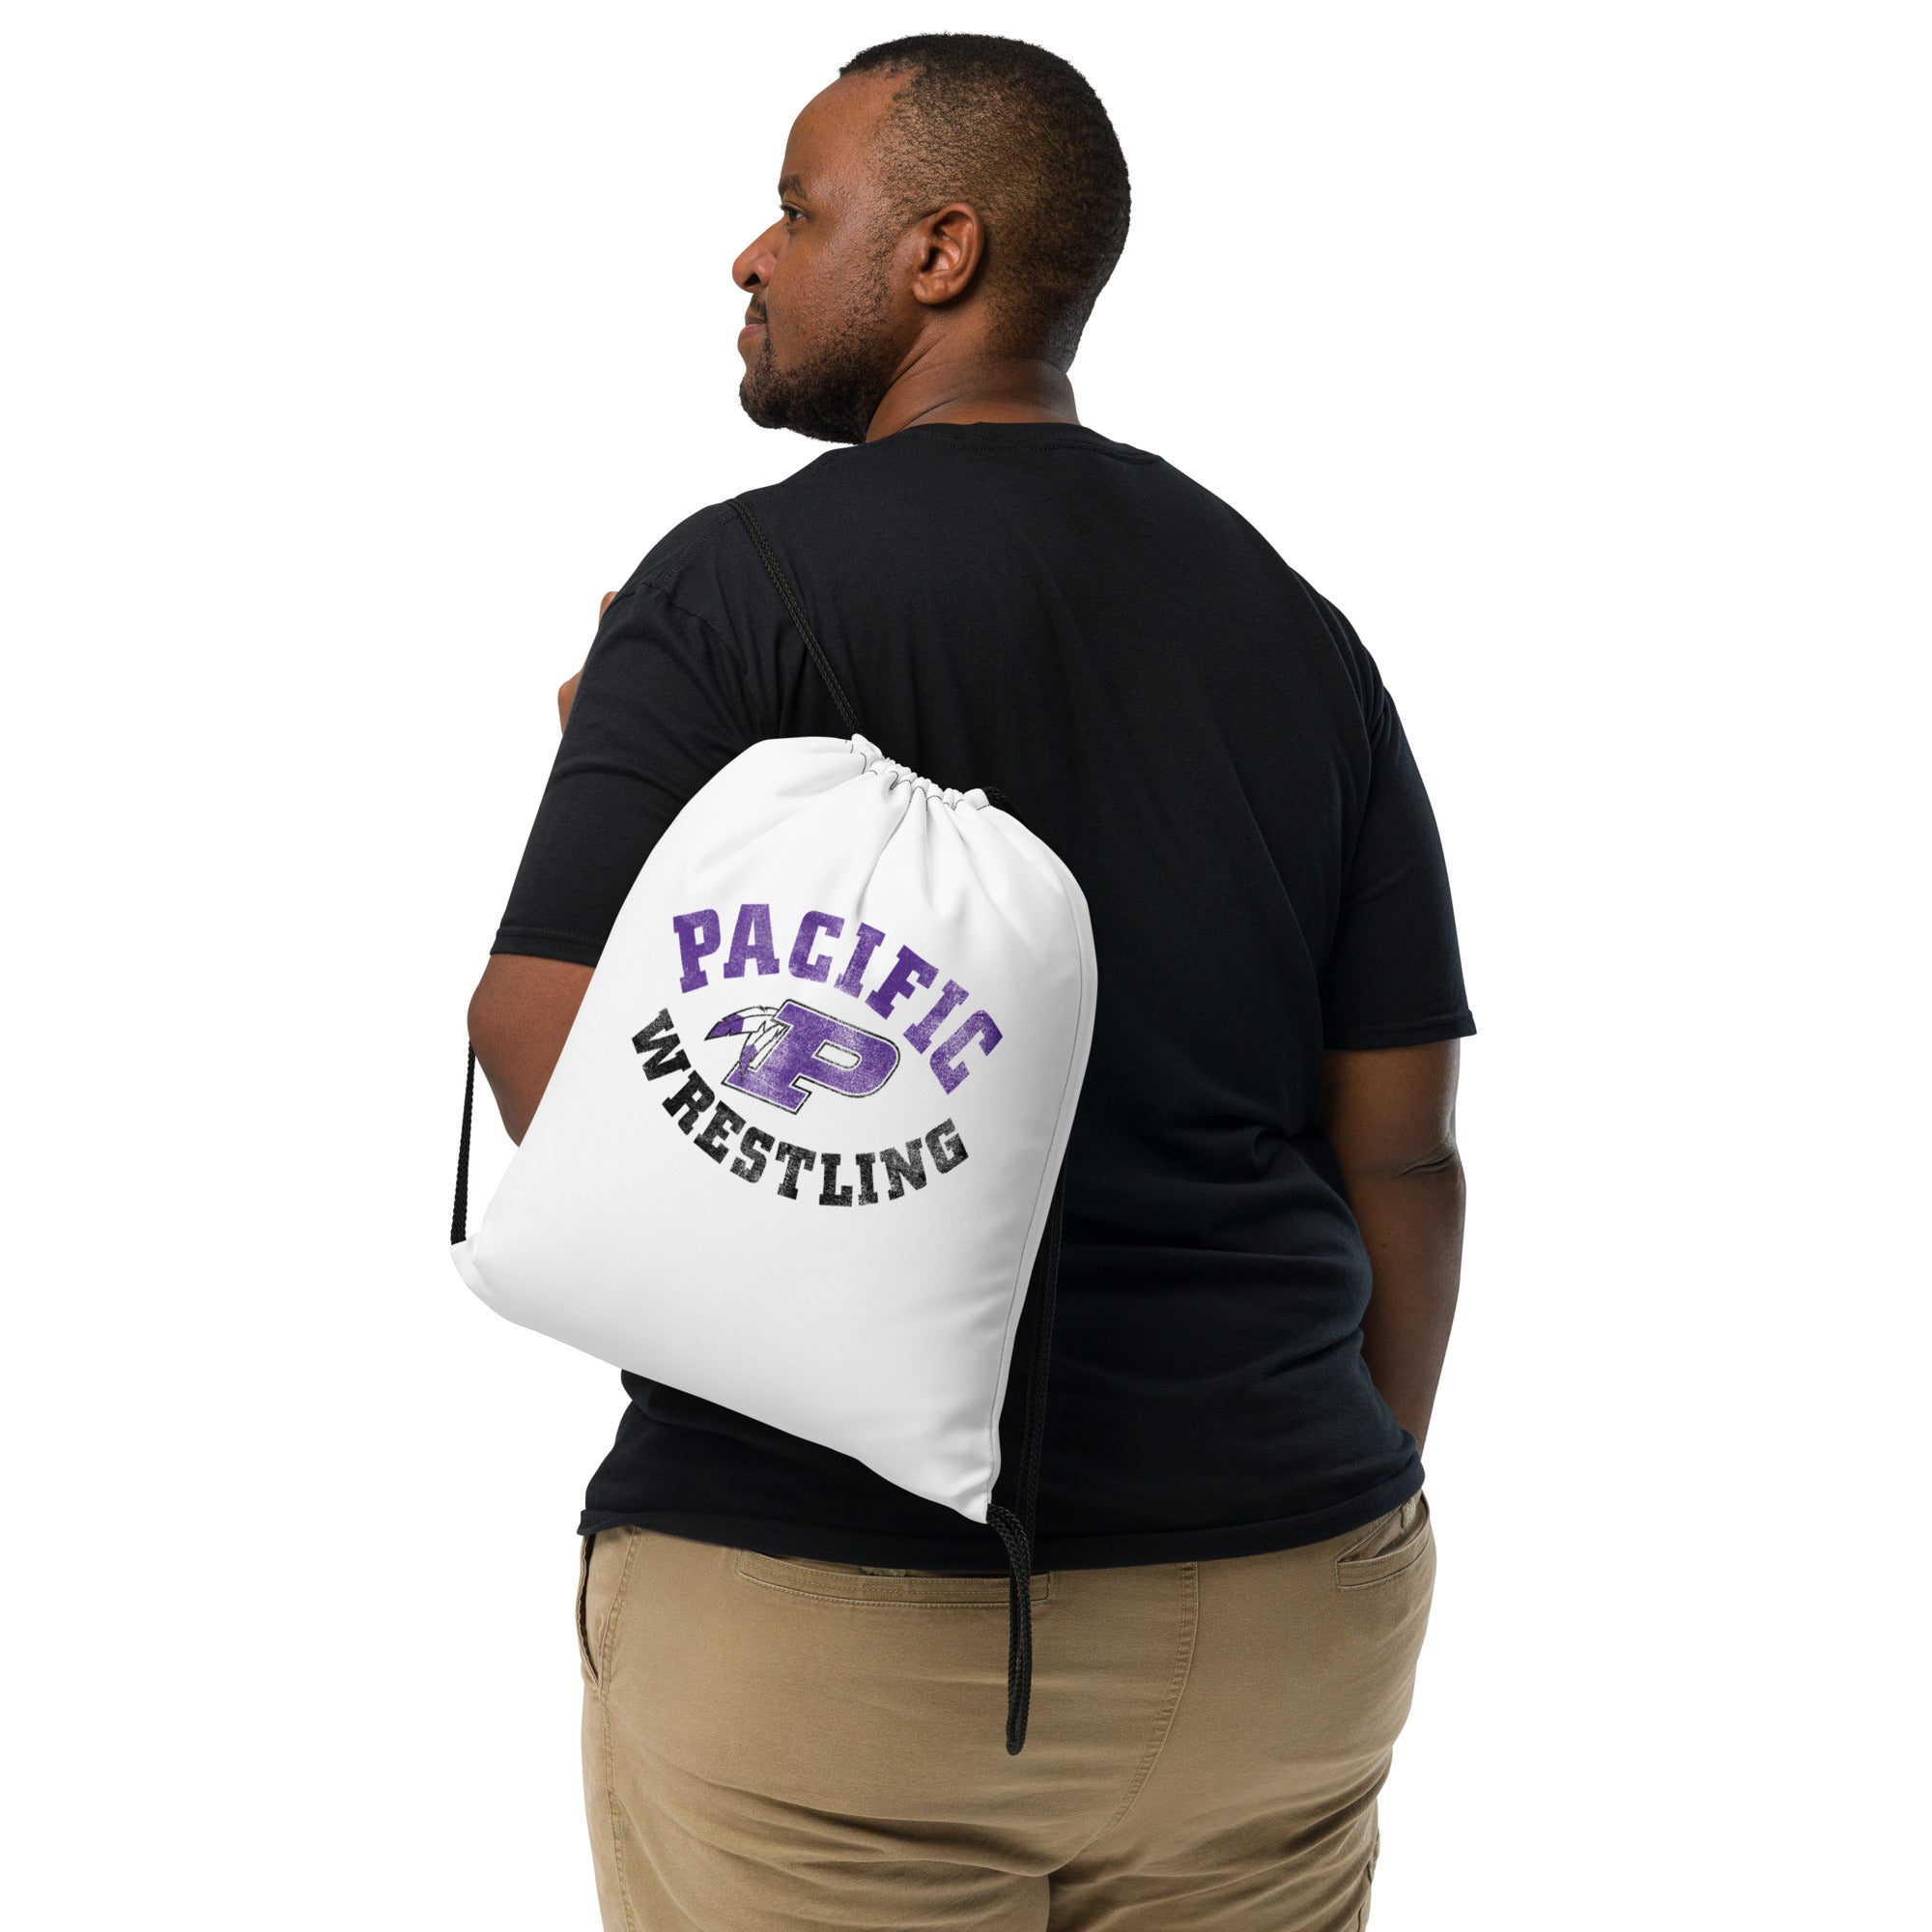 Pacific Wrestling All-Over Print Drawstring Bag